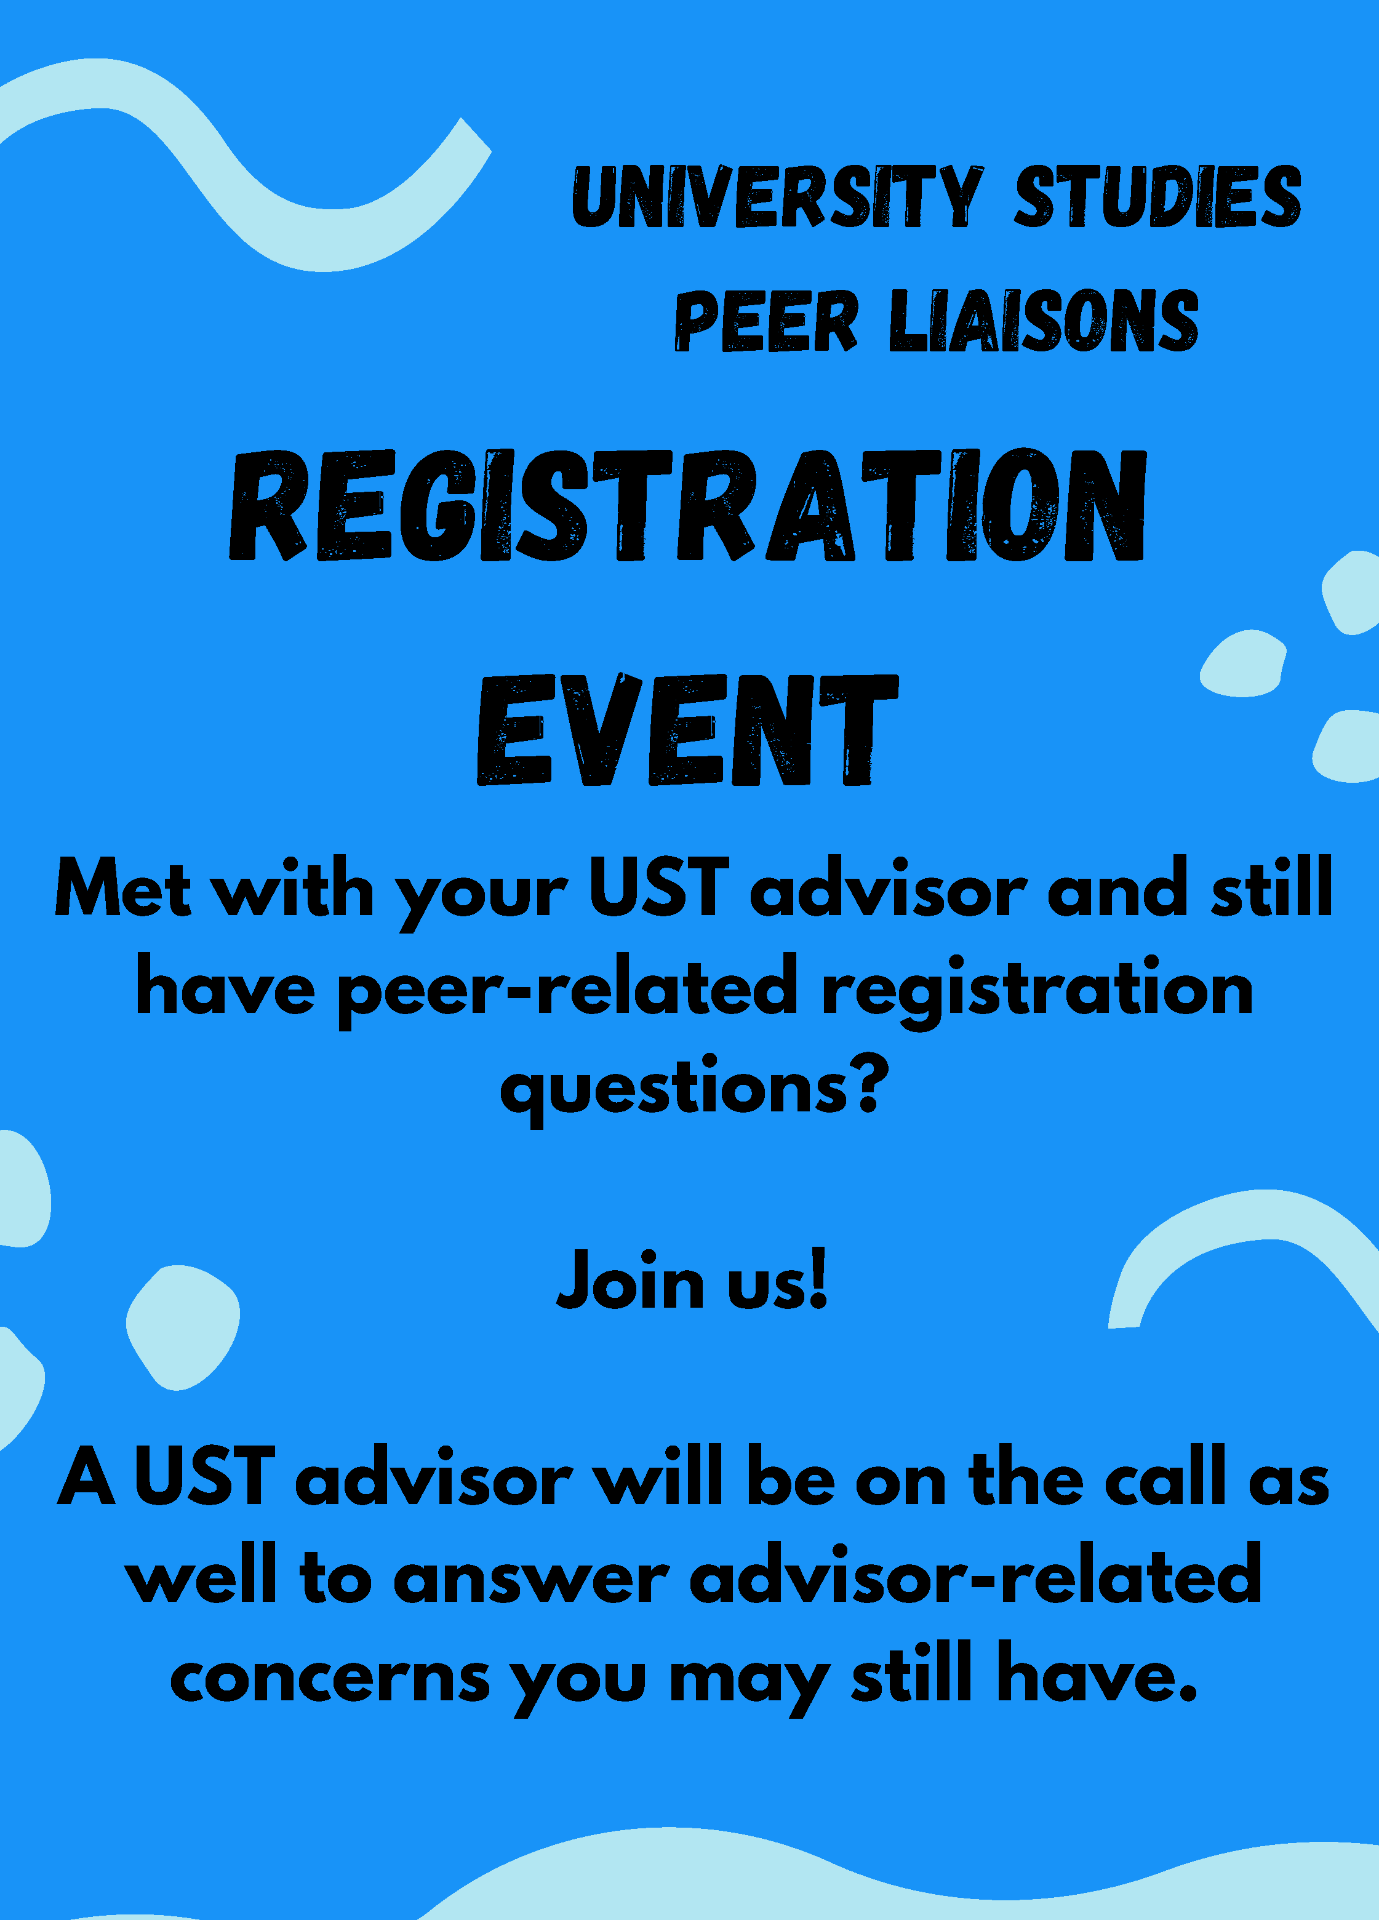 University Studies Peer Liaisons Registration Event. Met with your UST advisor and still have peer-related registration questions? Join us! A UST advisor will be on the call as well to answer advisor-related concerns you may still have.